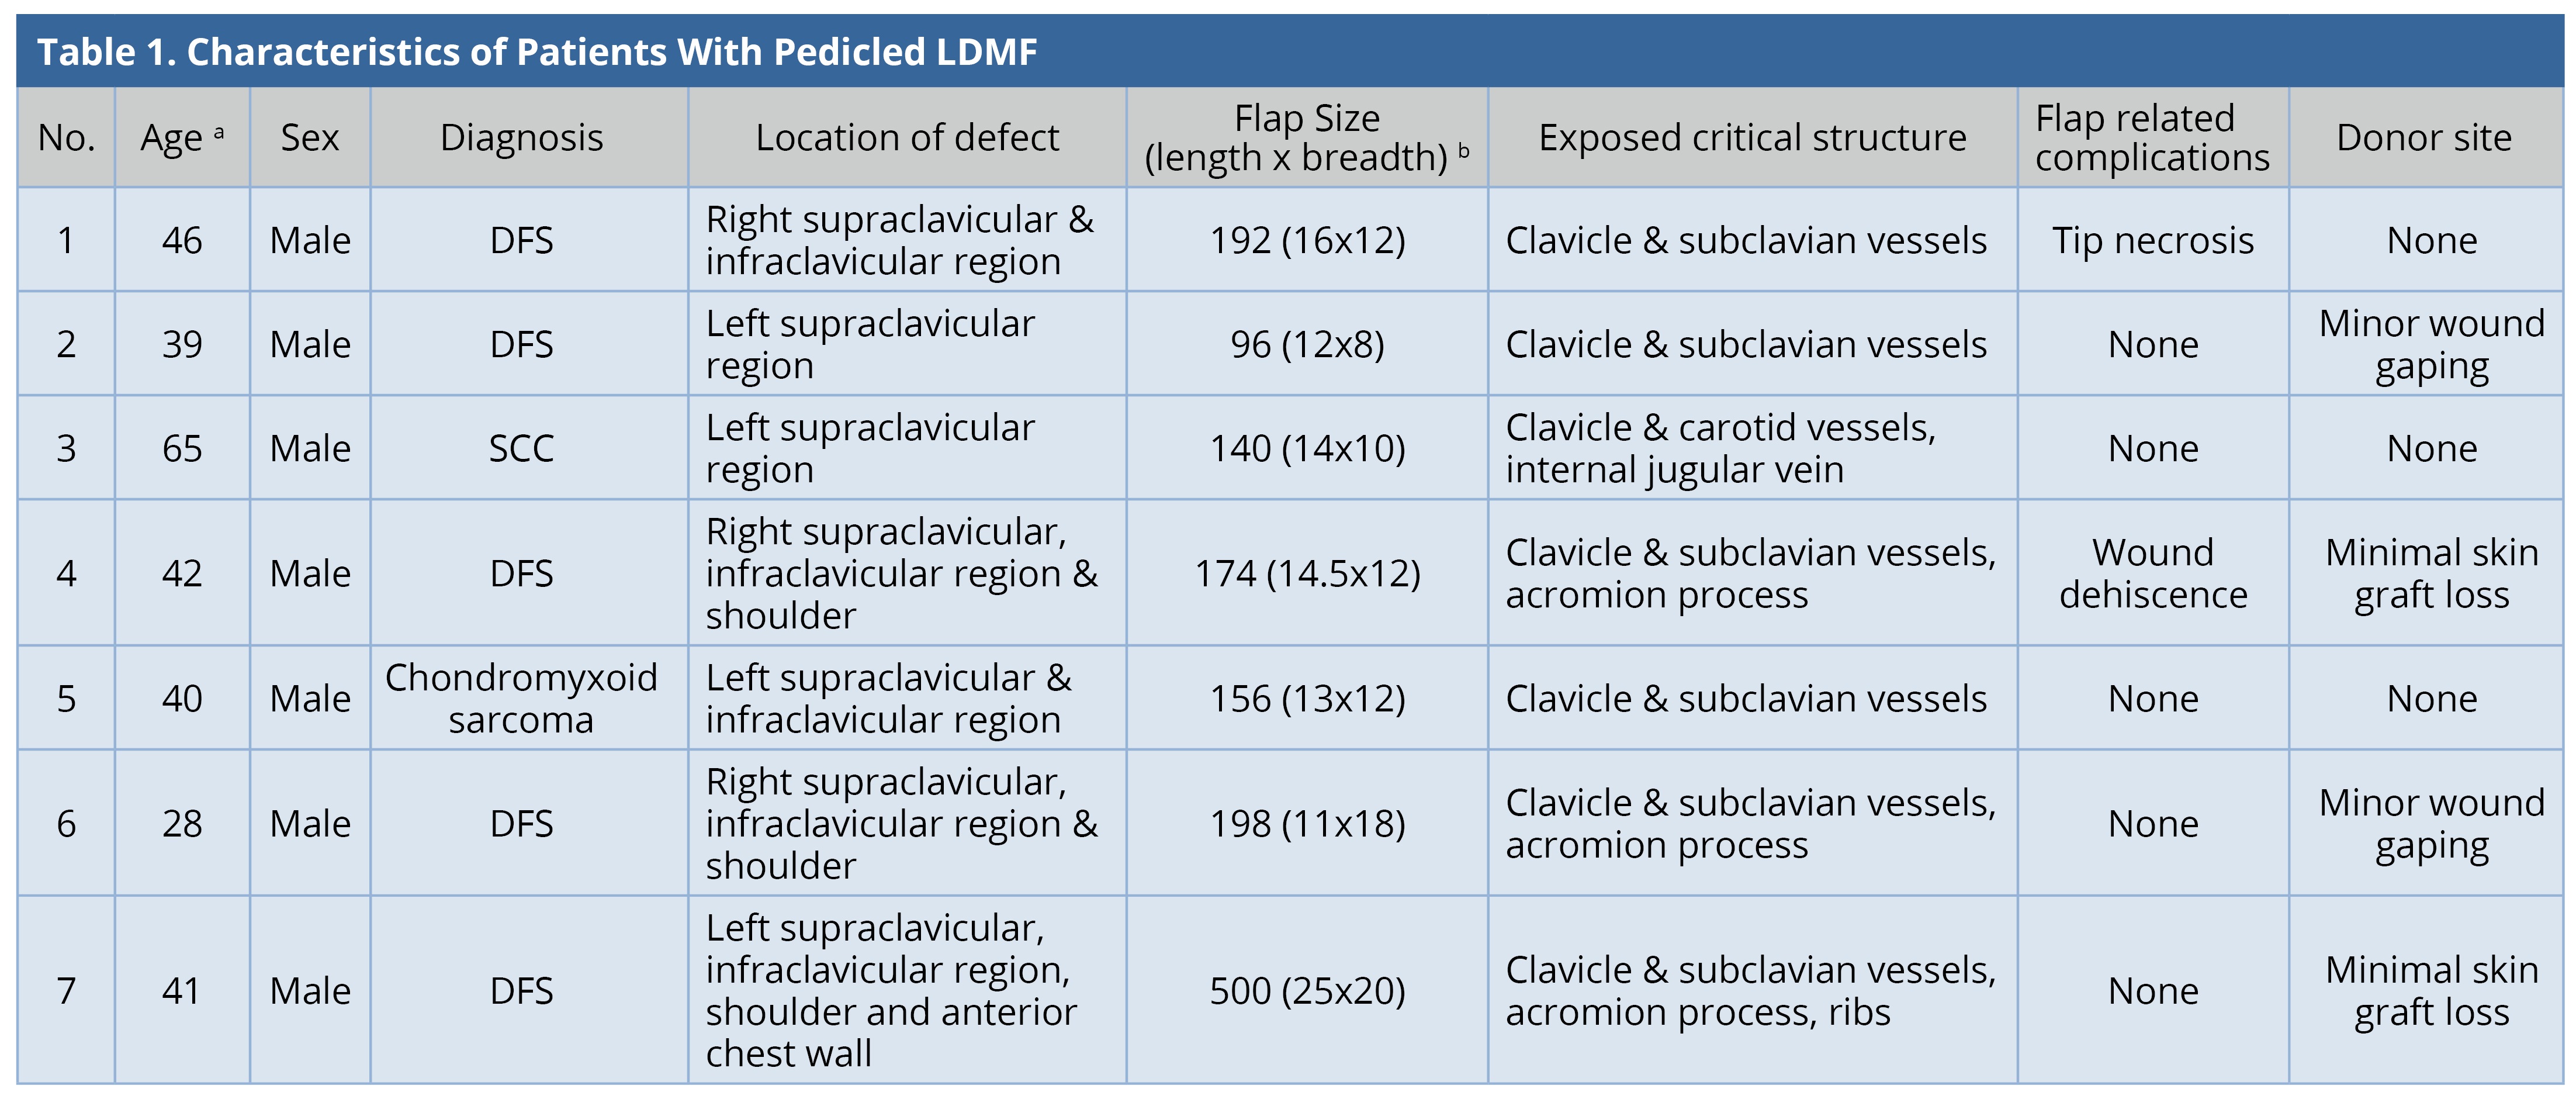 Table 1.jpgCharacteristics of patients with pedicled LDMF.<br><sup><sup>a</sup>Age in years.<br> <sup>b</sup>Flap Size in cm<sup>2</sup>.<br> DFS, Dermatofibrosarcoma; LDMF, latissimus dorsi myocutaneous flap; SCC, Squamous cell carcinoma.</sup>